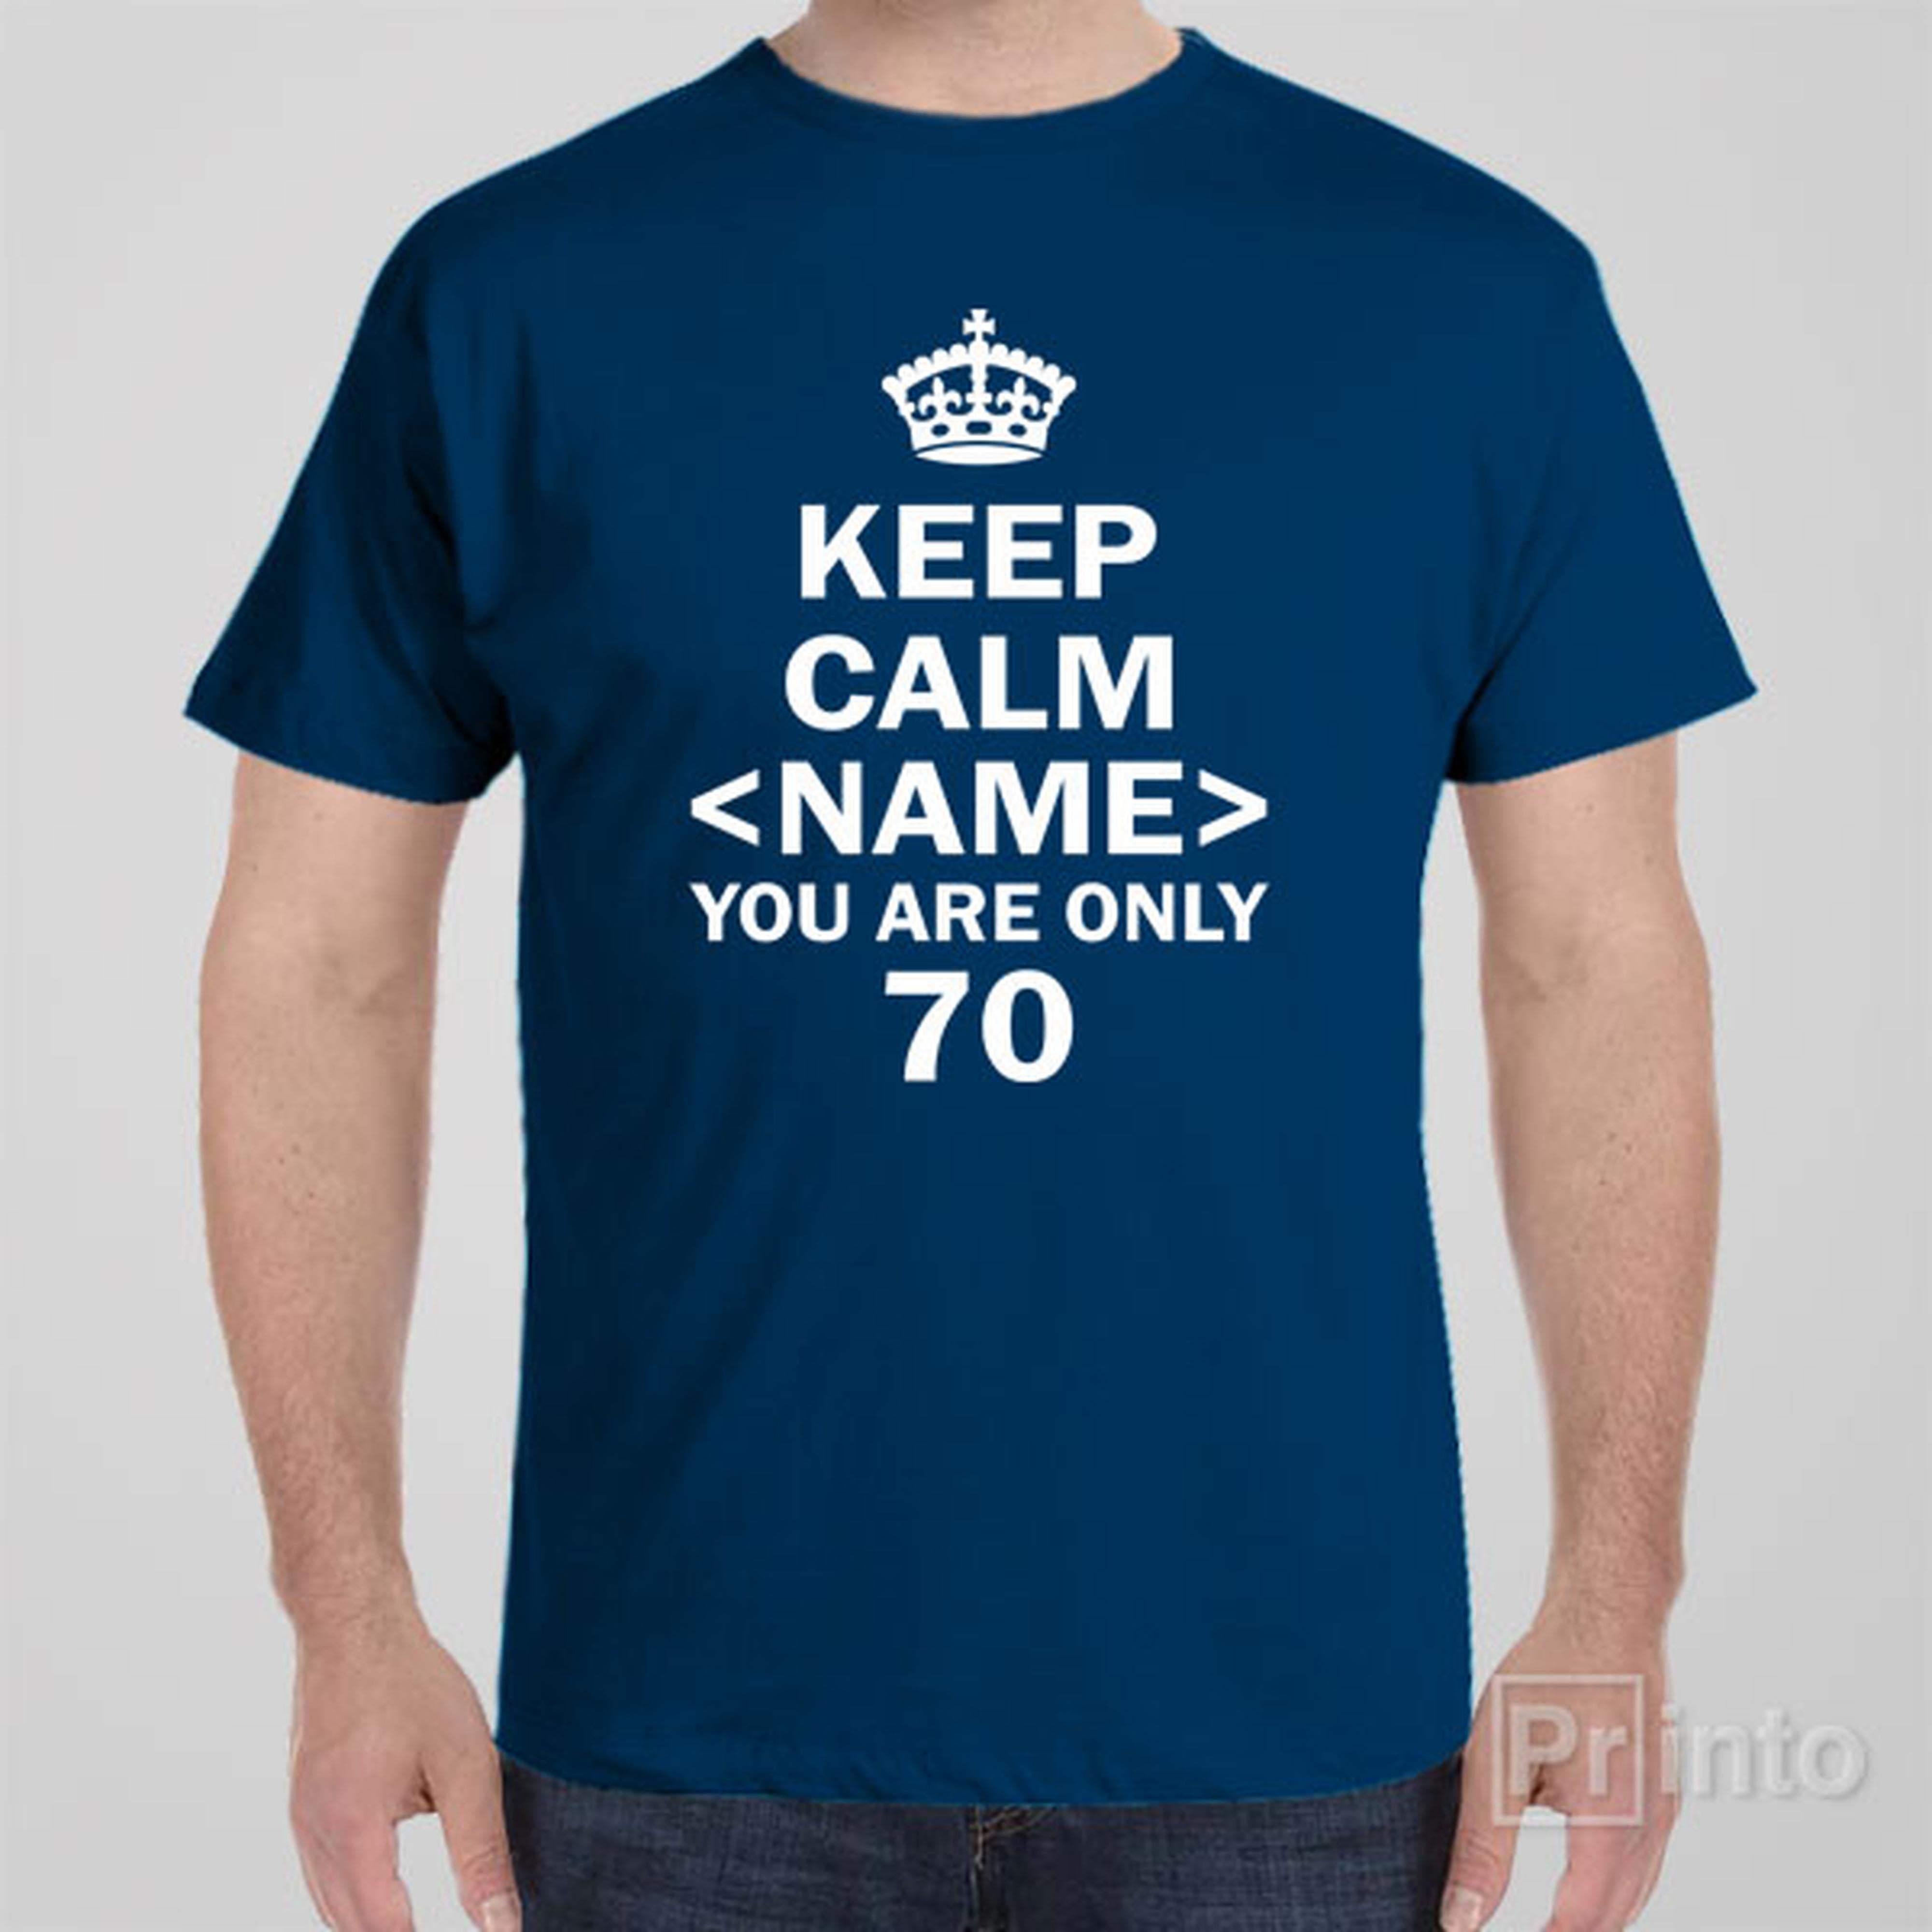 keep-calm-you-are-only-70-t-shirt